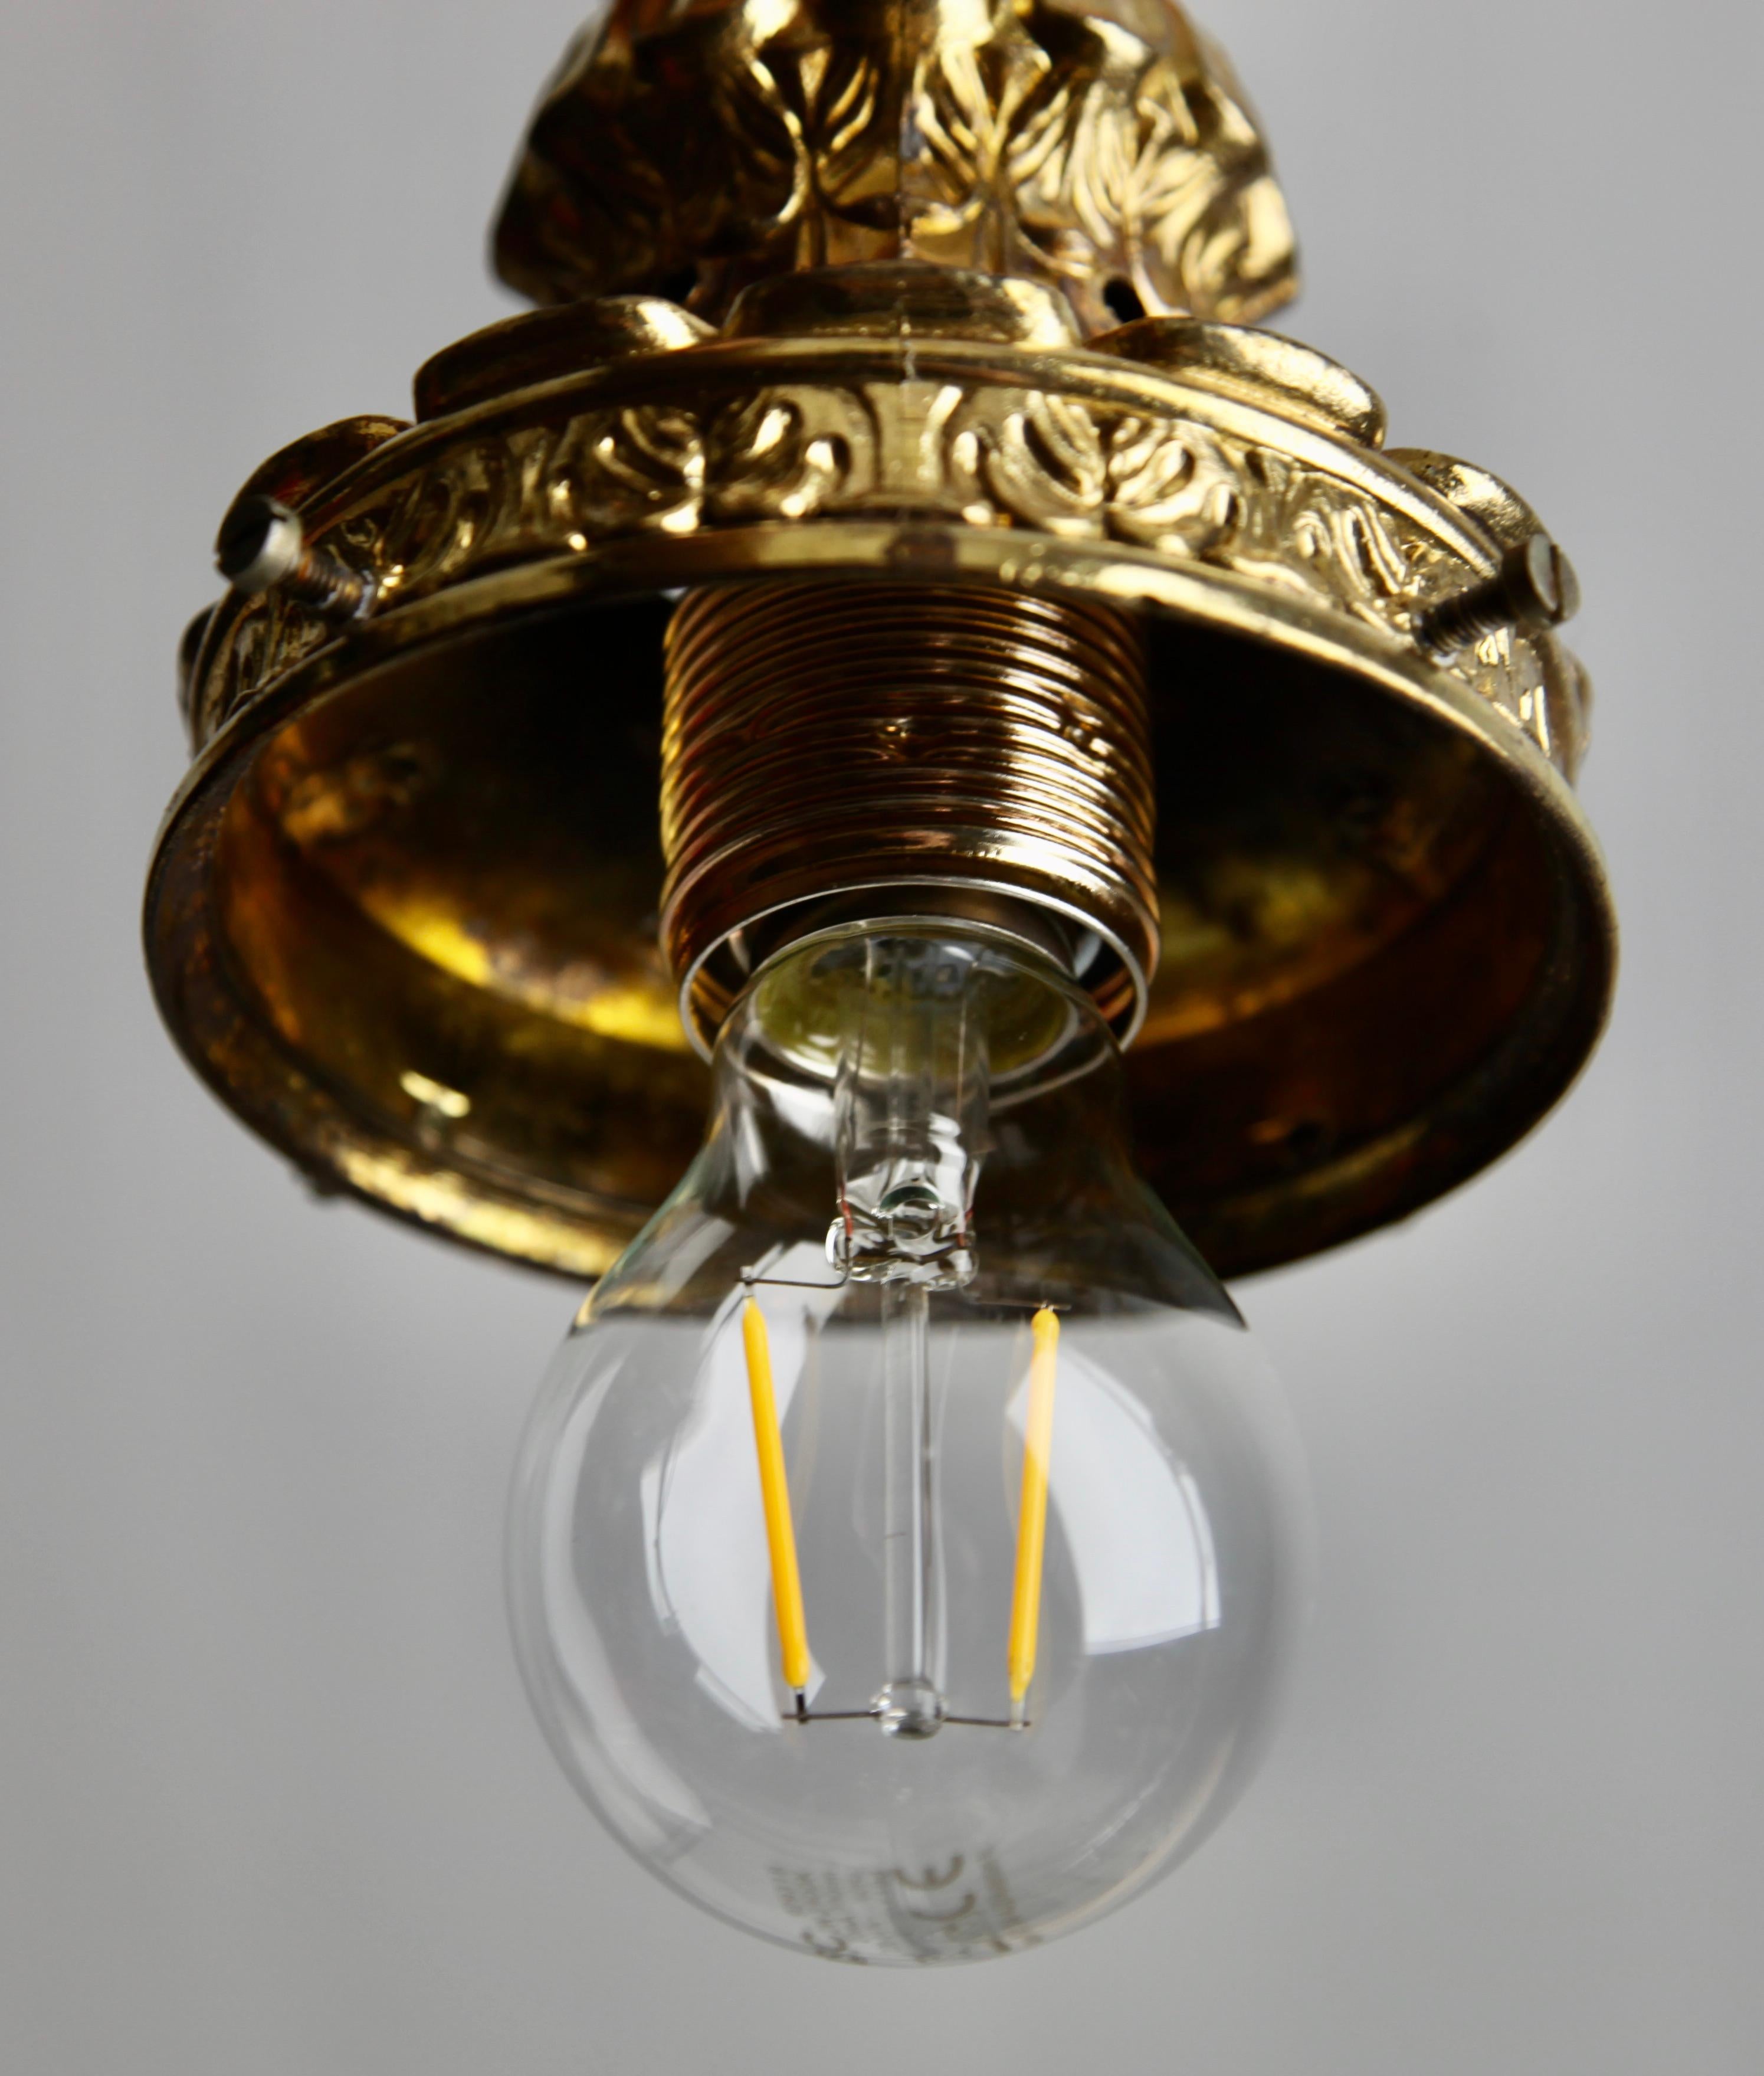 Mid-20th Century Scailmont Pendant Lamp with a Opaline Shade and Brass Fittings, 1930s, Belgium